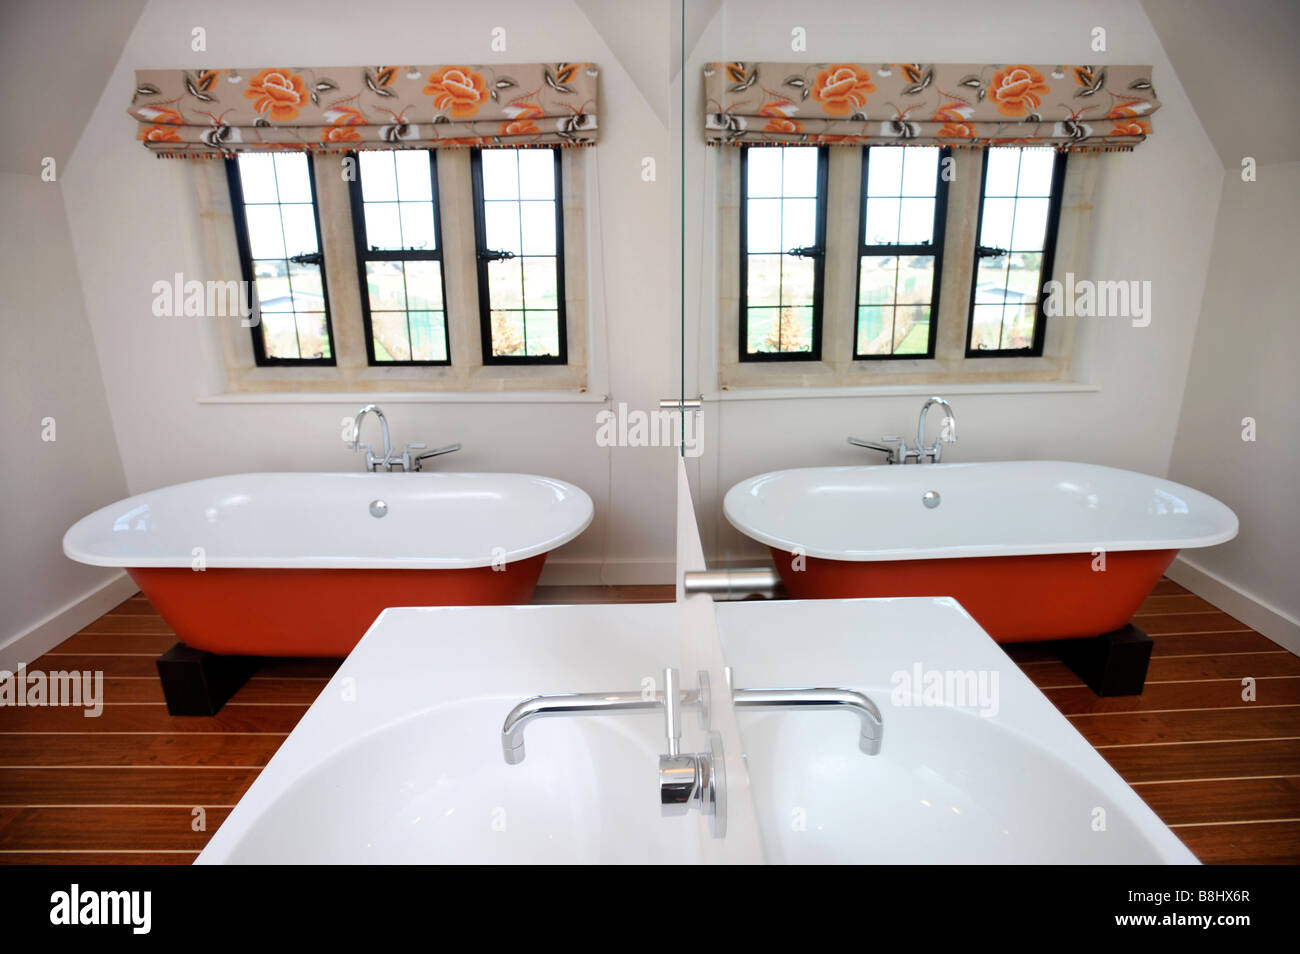 A MODERN LUXURY BATHROOM WITH FREESTANDING BATH REFLECTED IN THE BASIN MIRROR UK Stock Photo